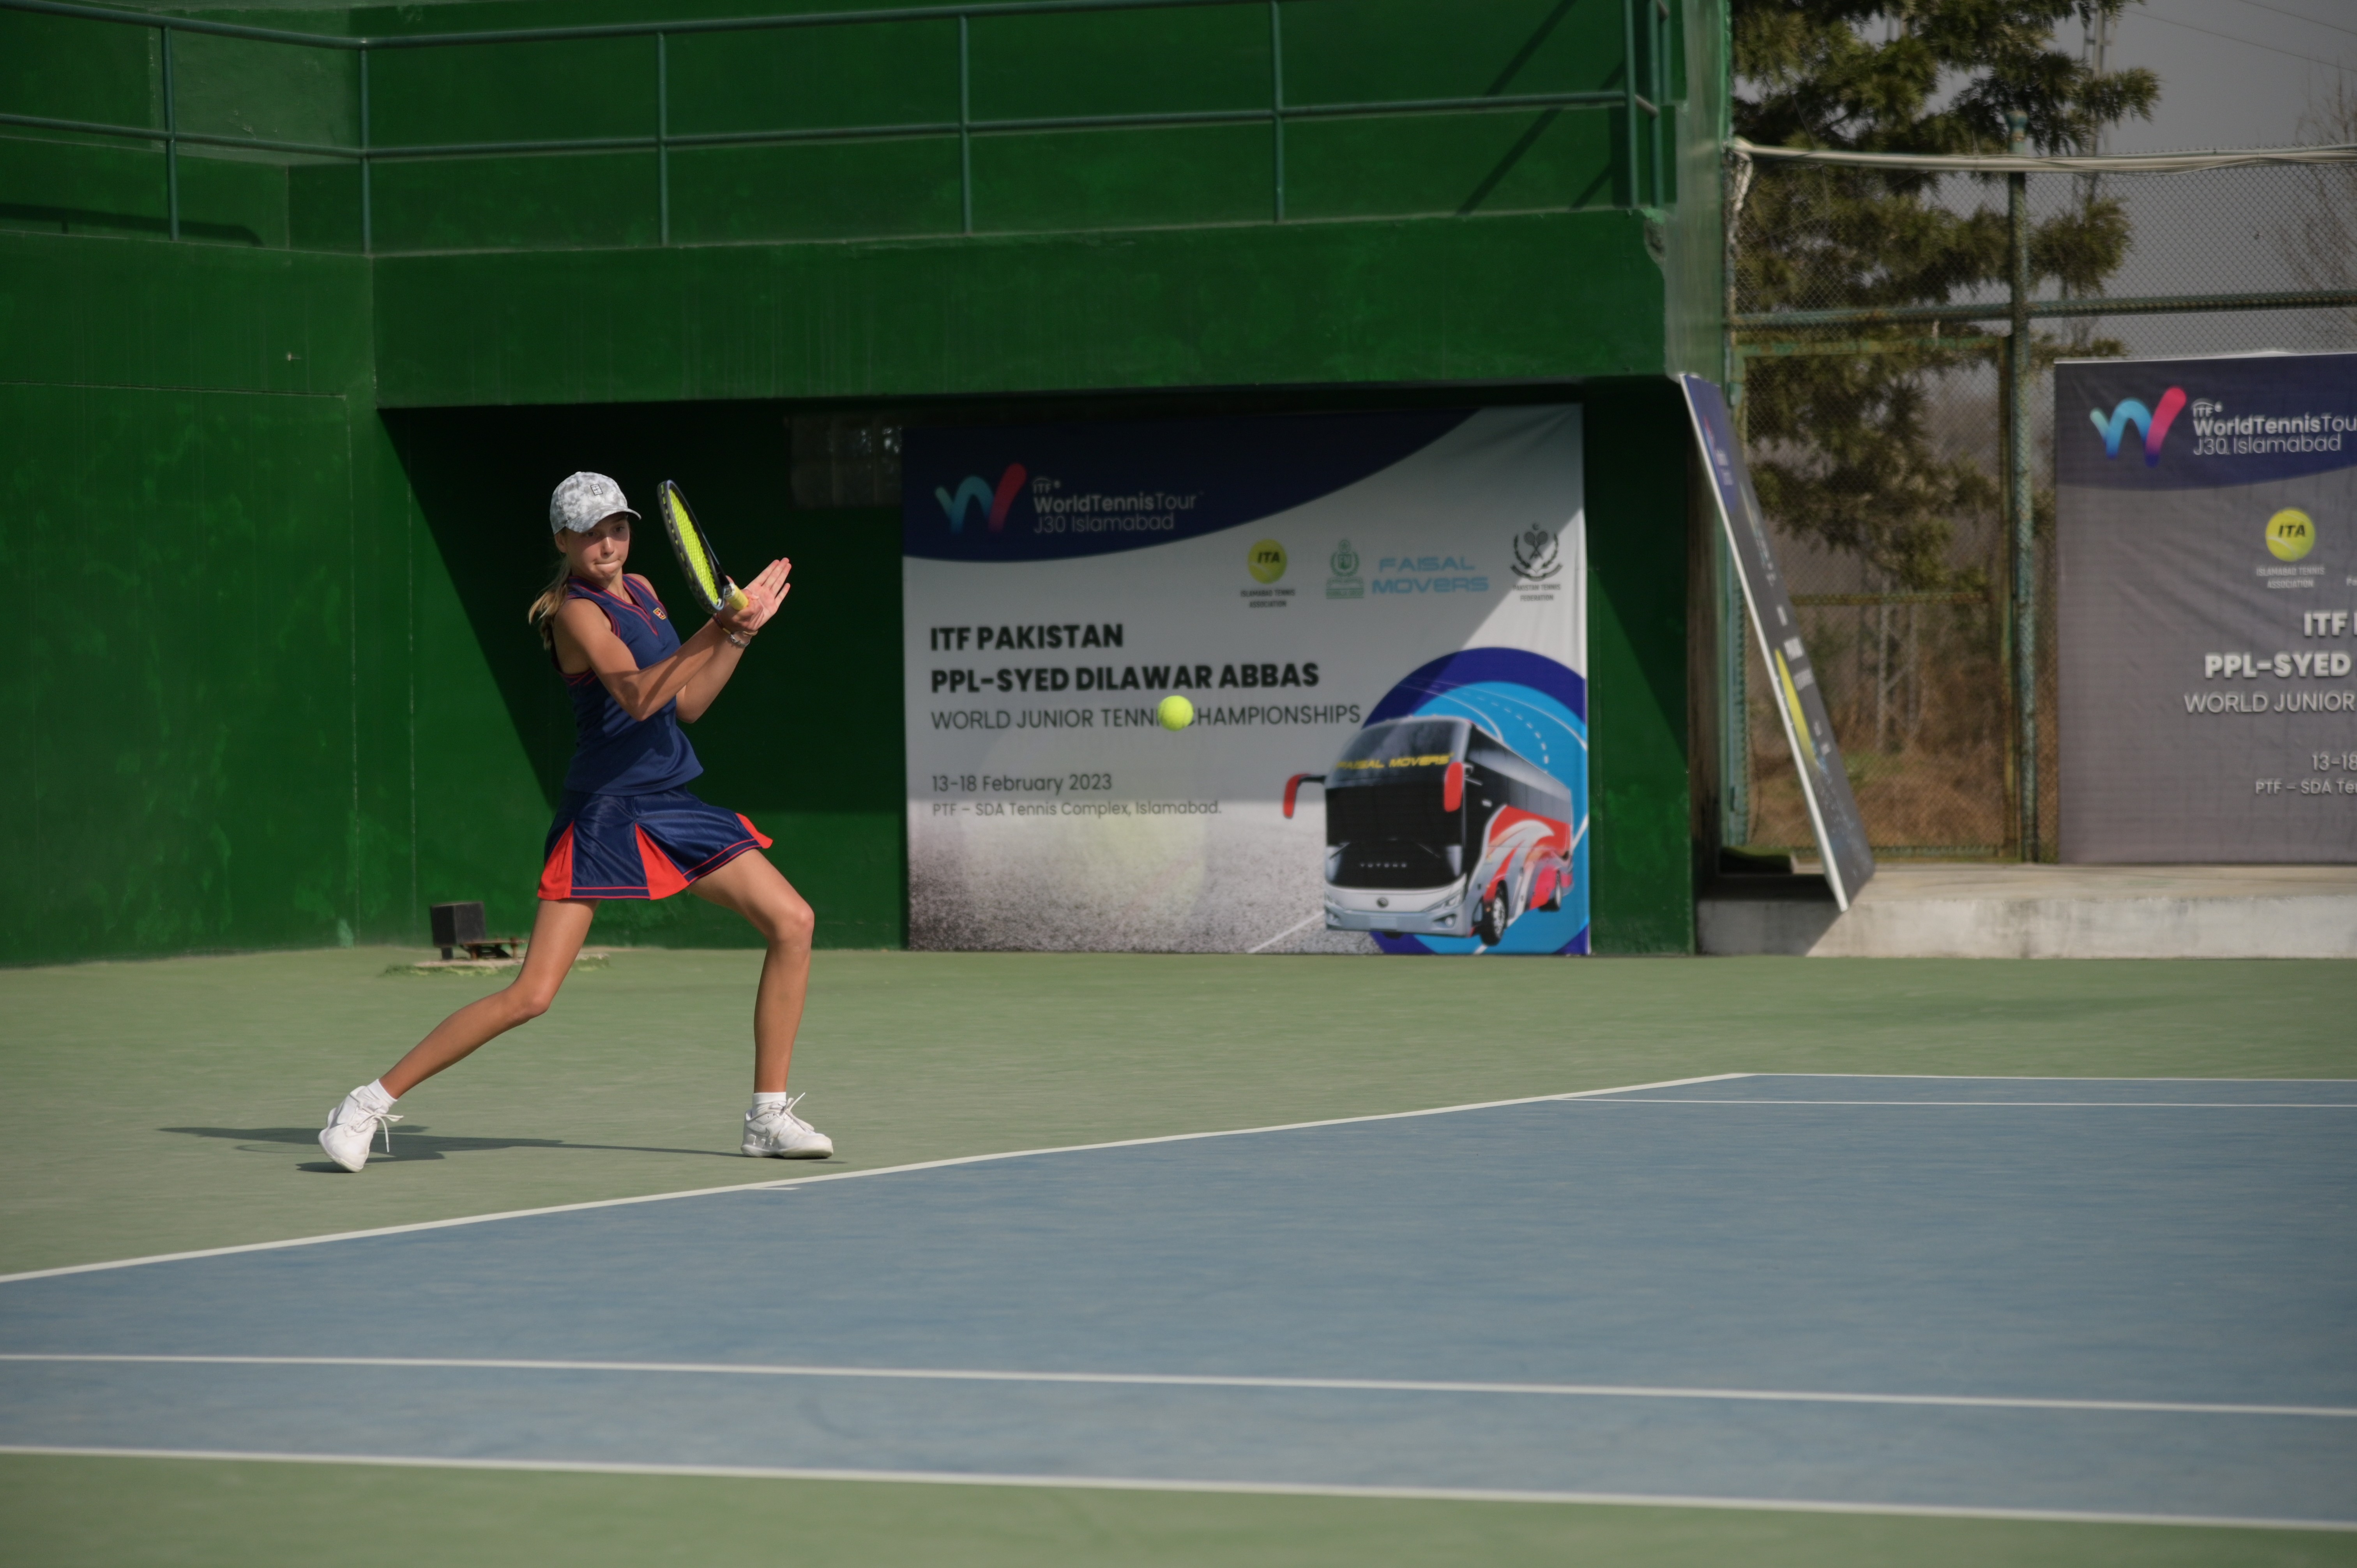 A player playing tennis